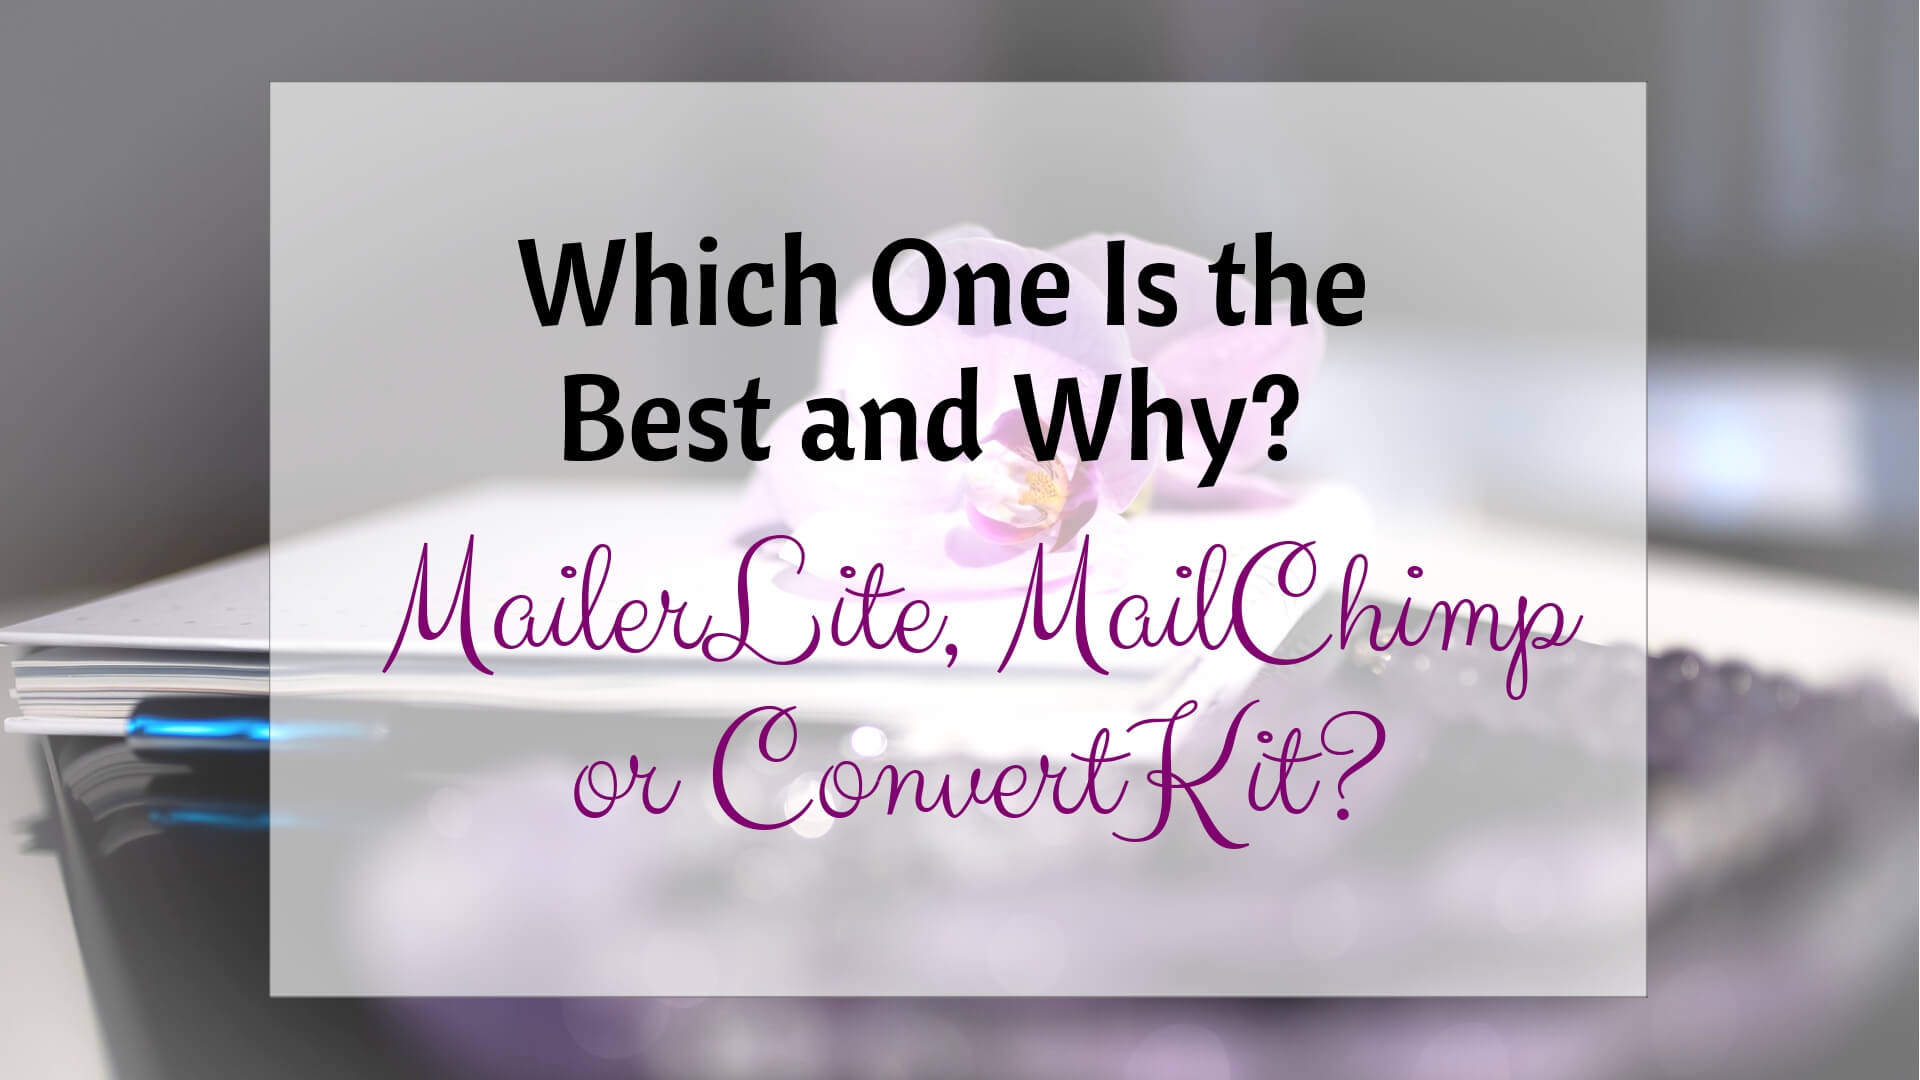 Why MailerLite is better than MailChimp? How About ConvertKit? Which One Is the Best and Why?